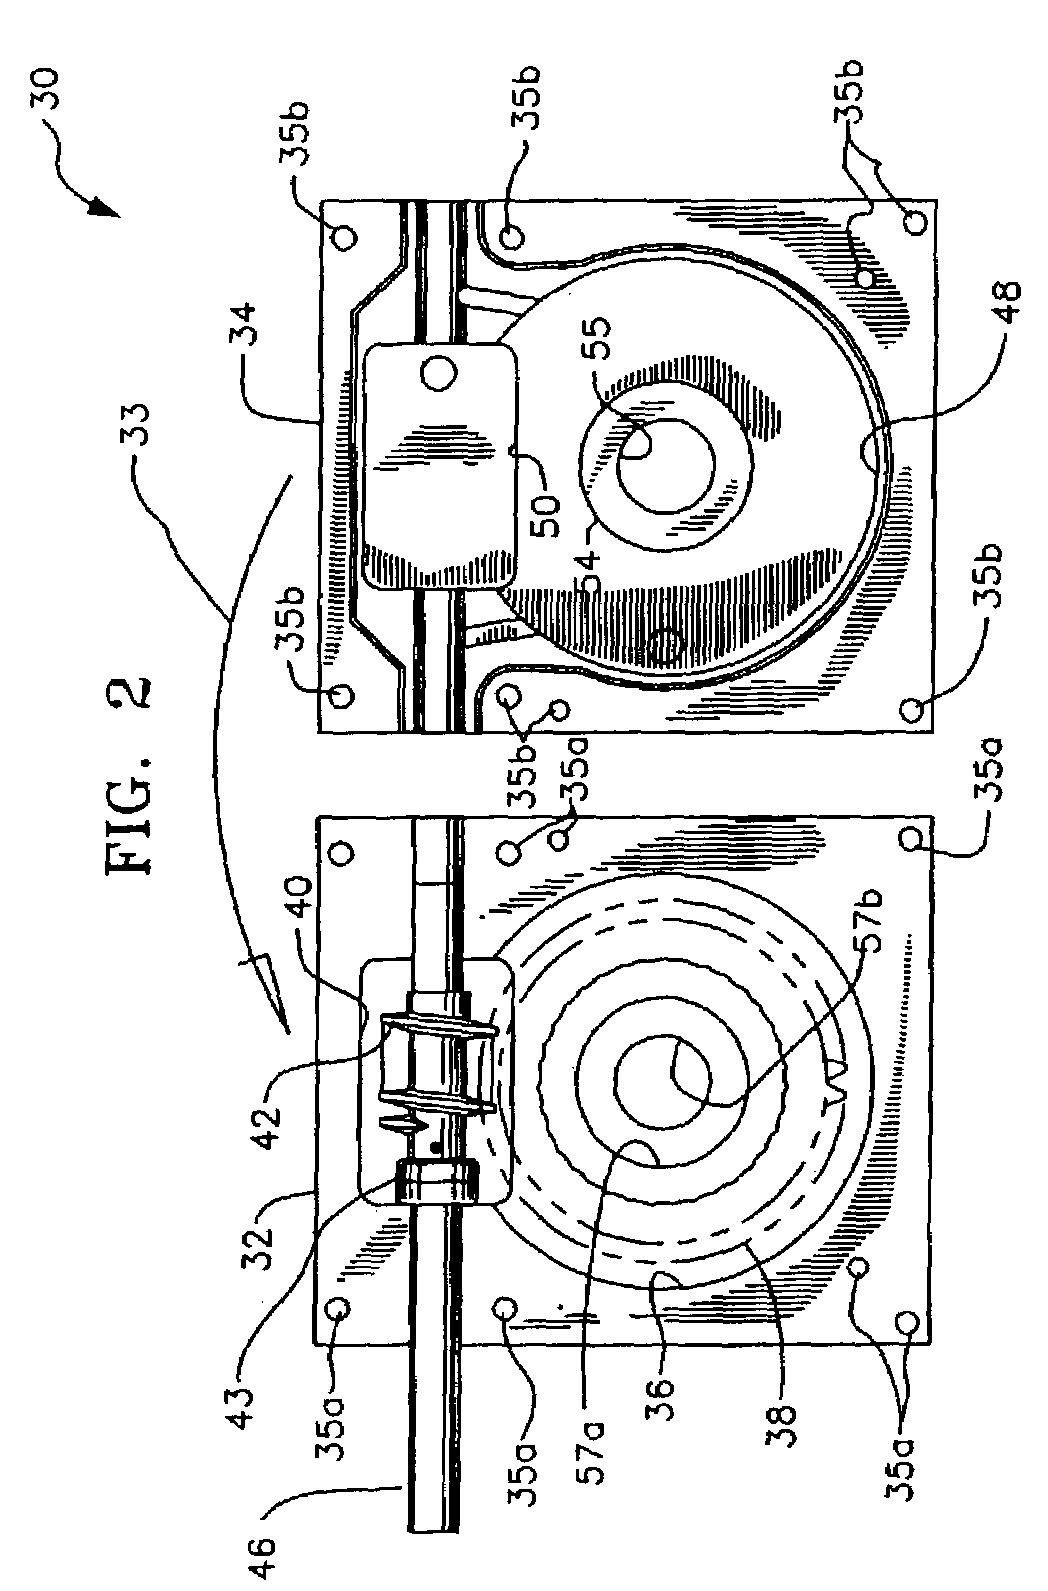 Method for making speed reducers